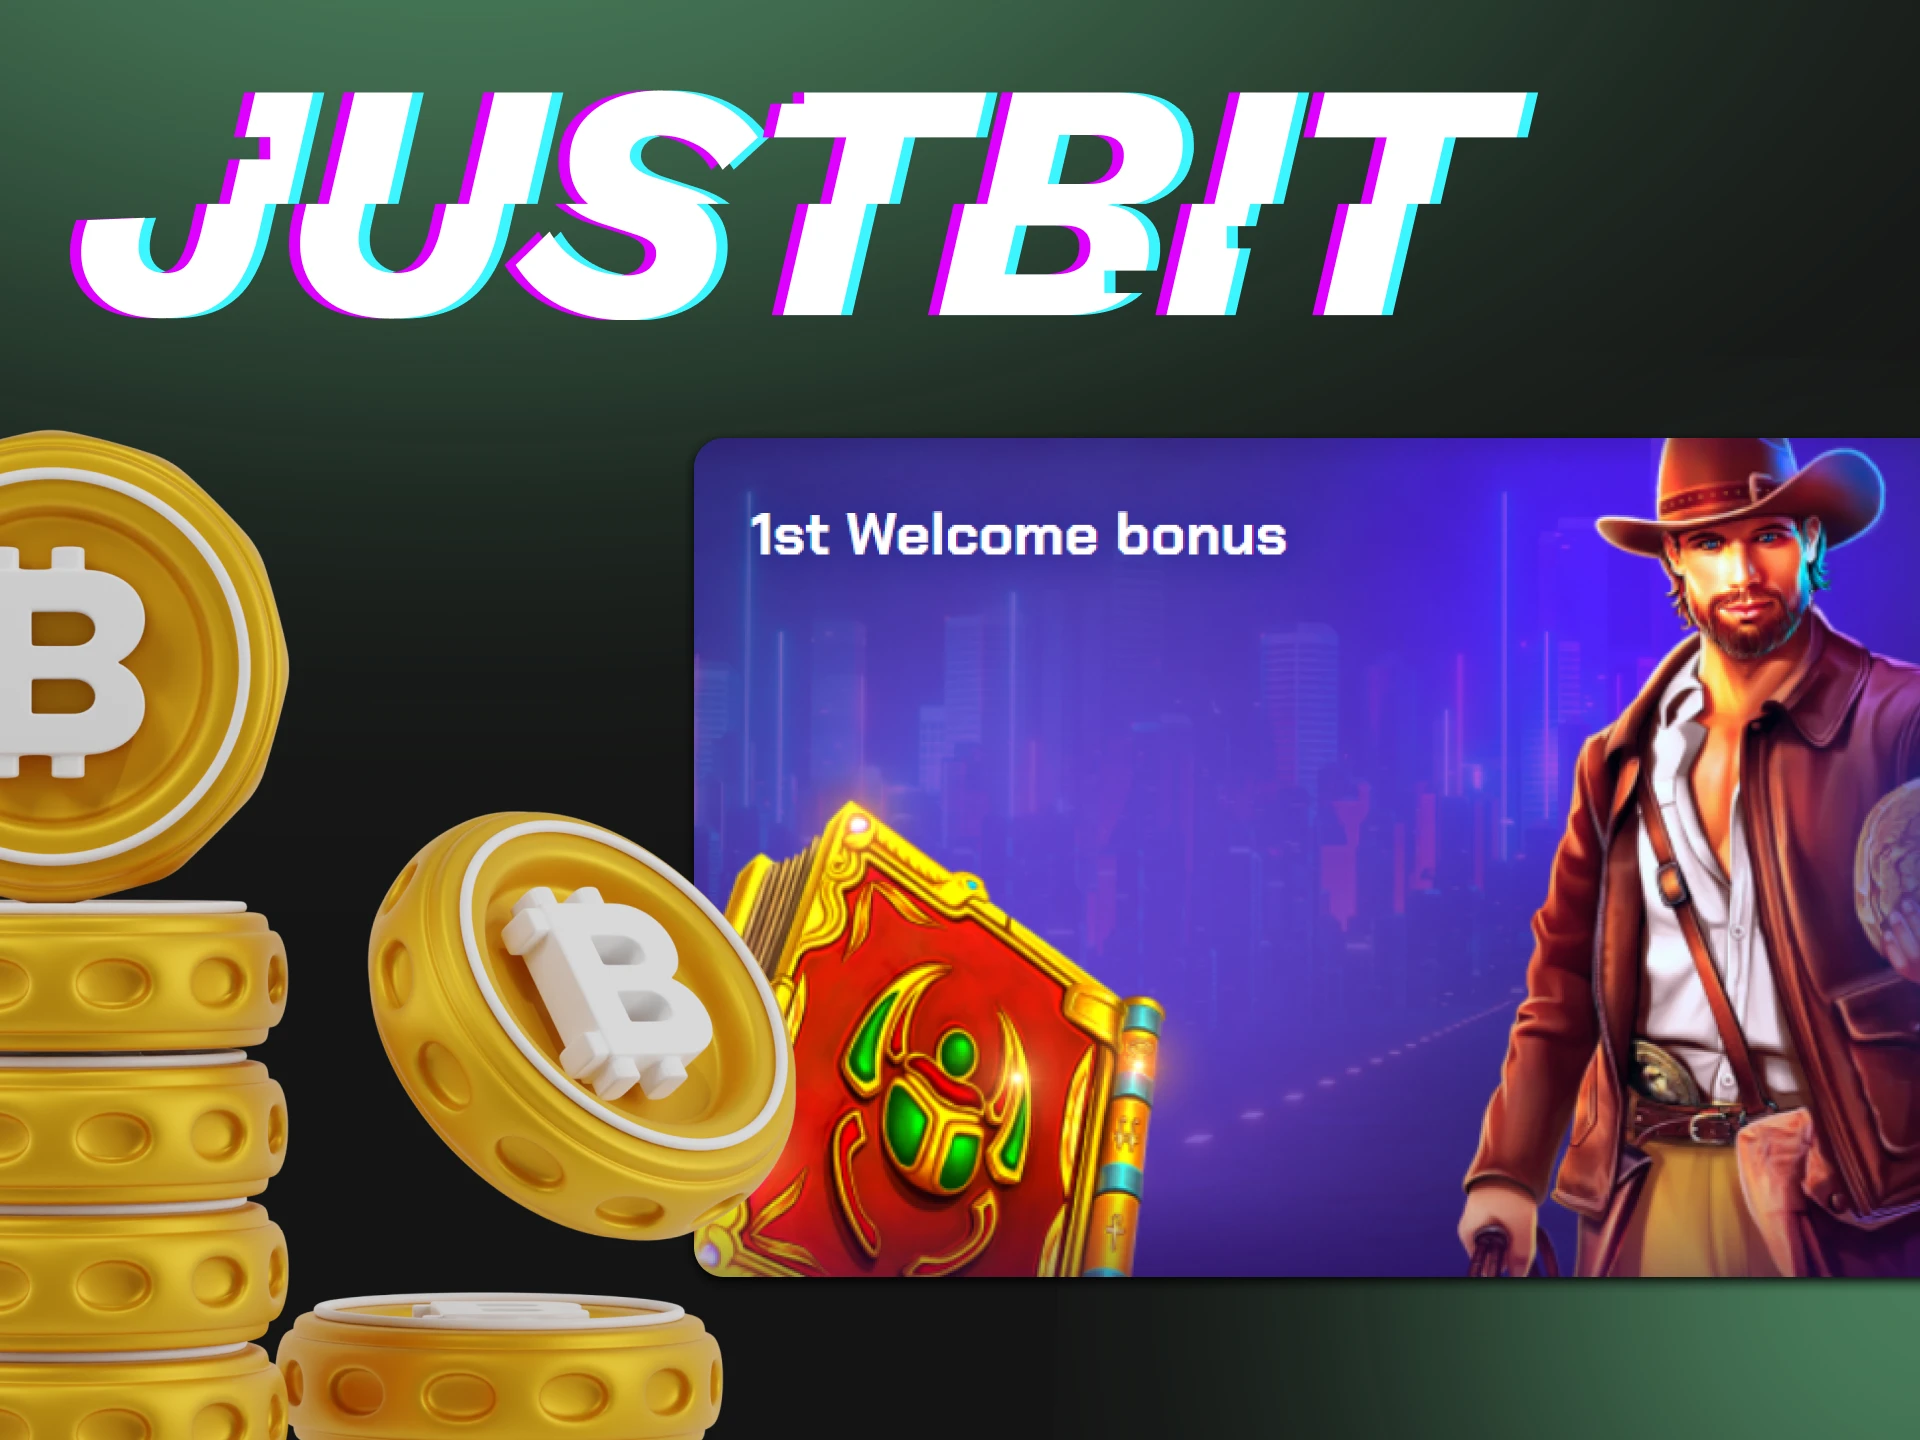 Find great bonuses at Justbit, the safest cryptocurrency casino in the world.